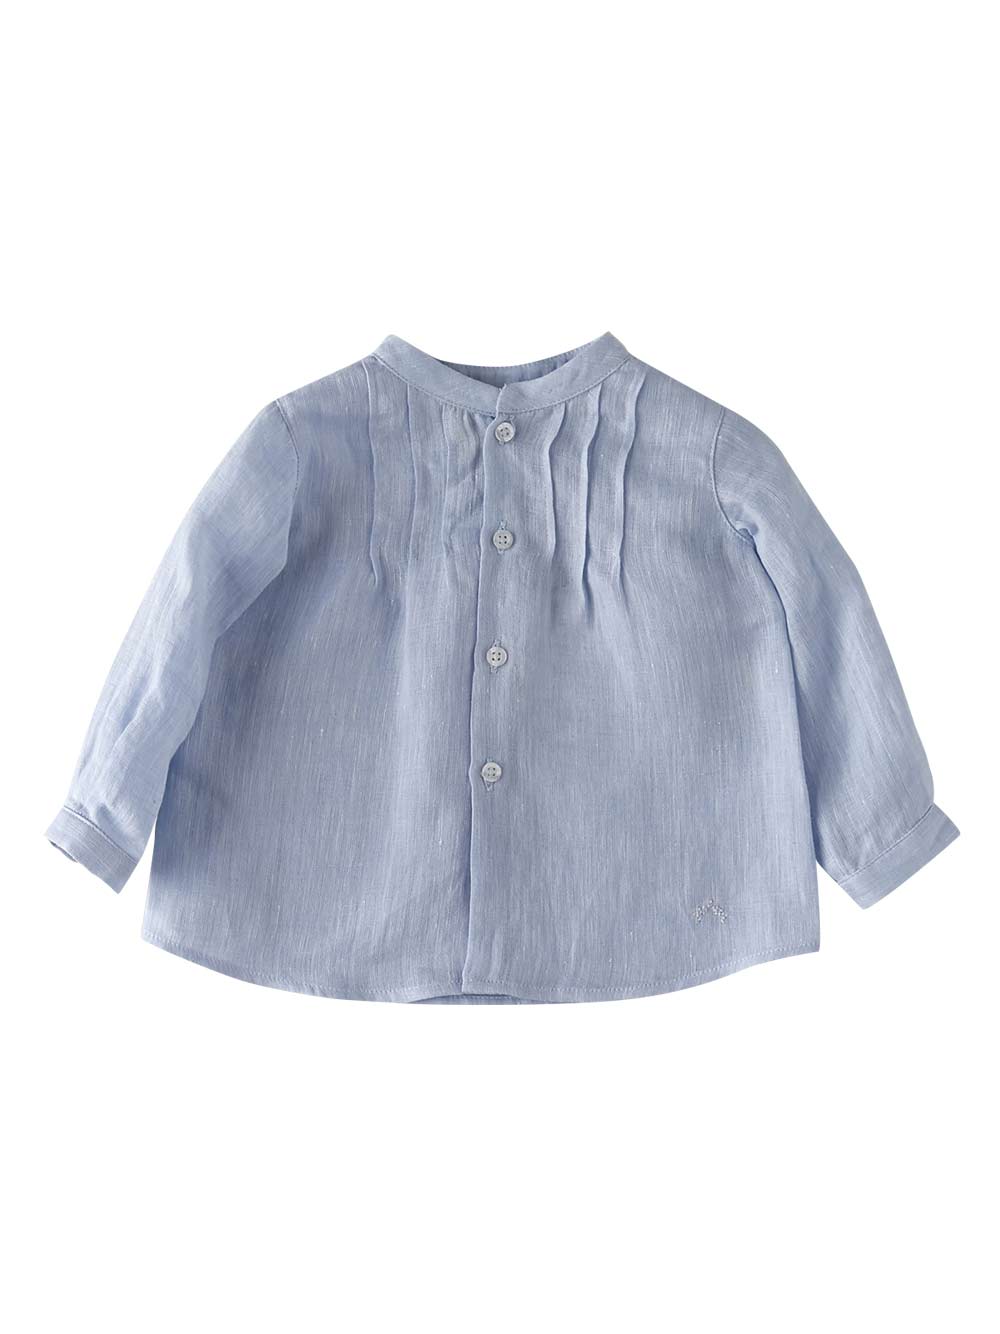 Blue Pin Tuck Baby Blouse